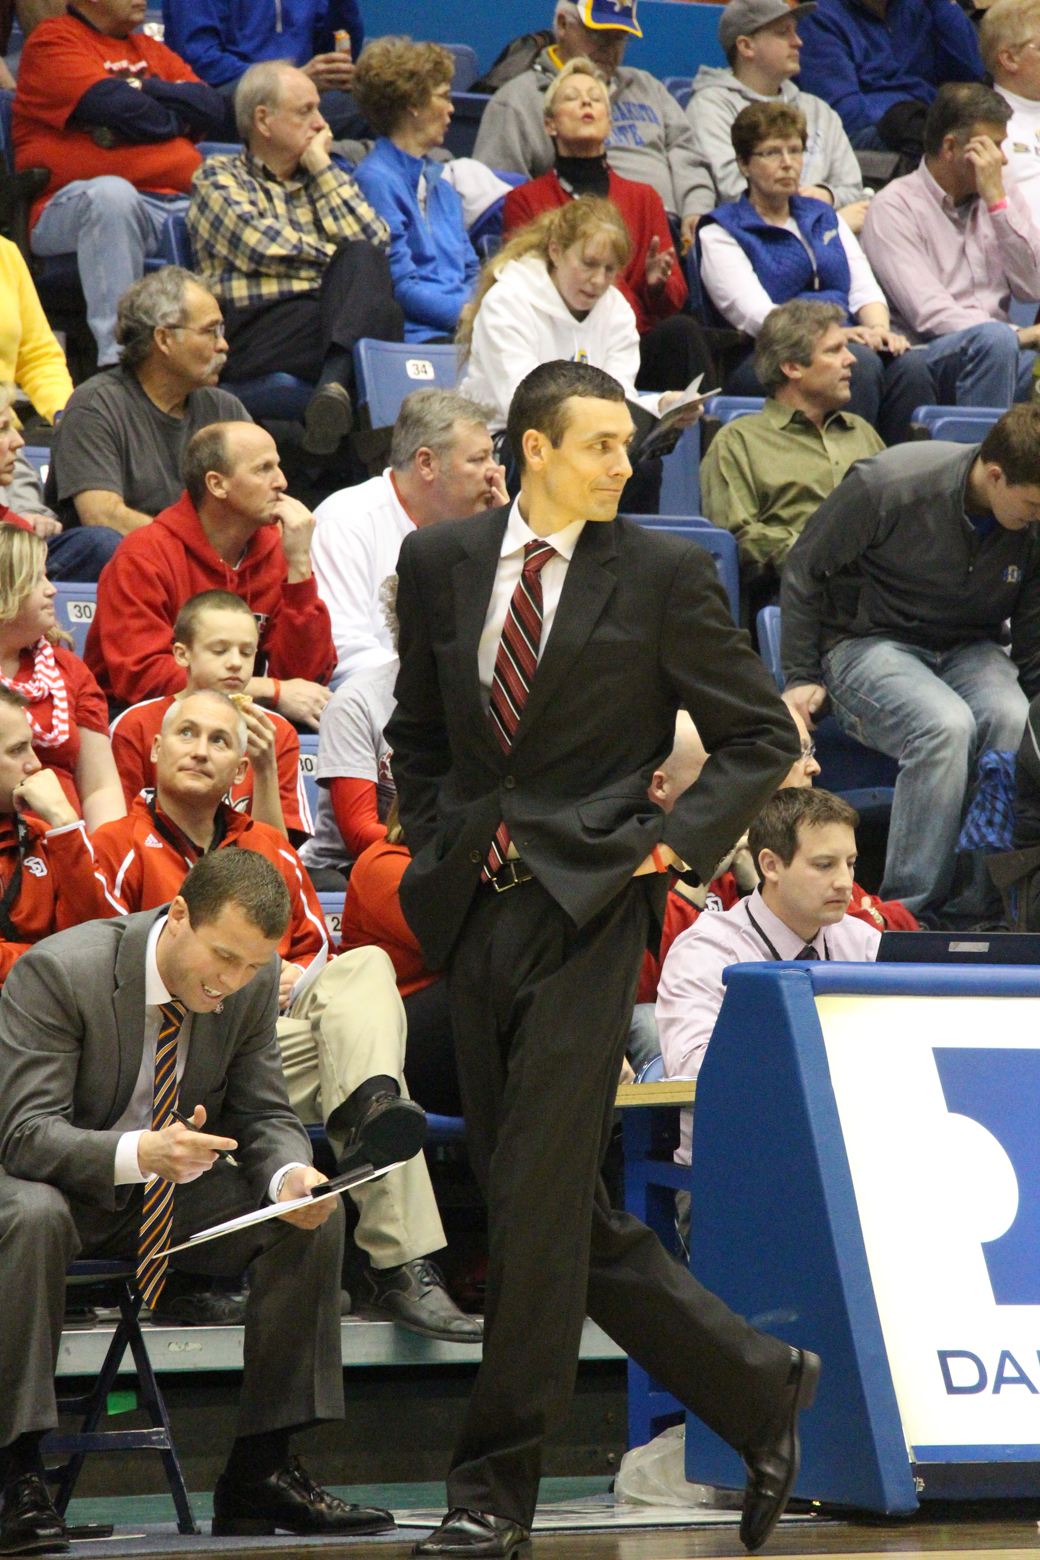 Men’s basketball says goodbye to James, starts search for new head coach